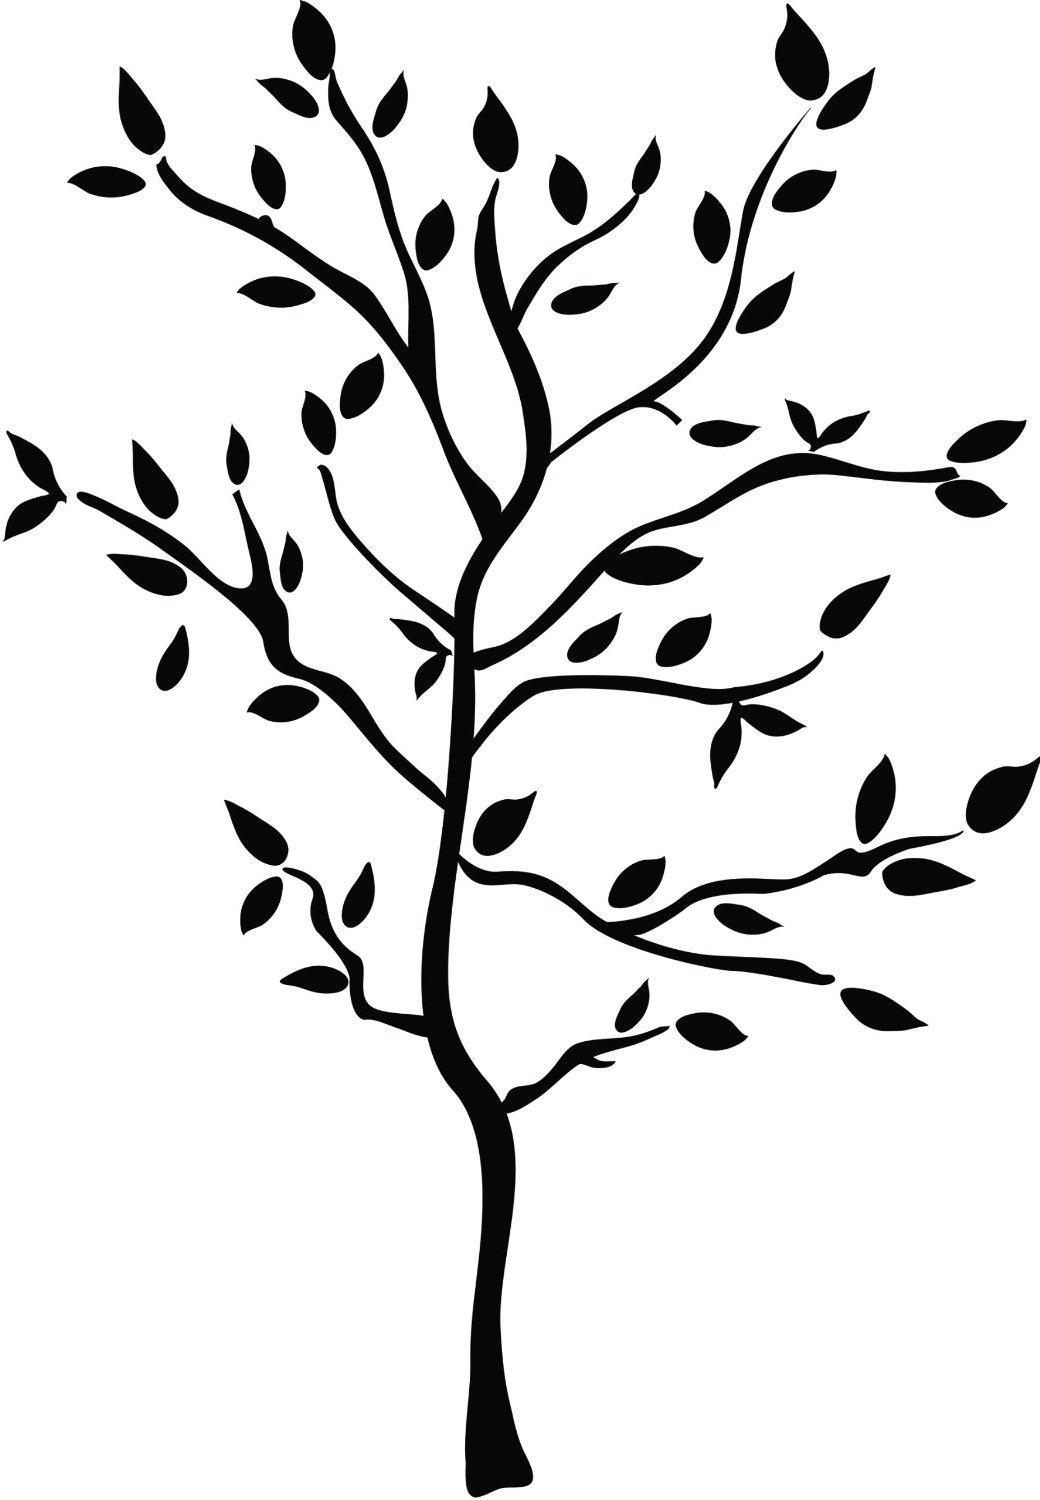 Cartoon Trees With Branches - Clipart library